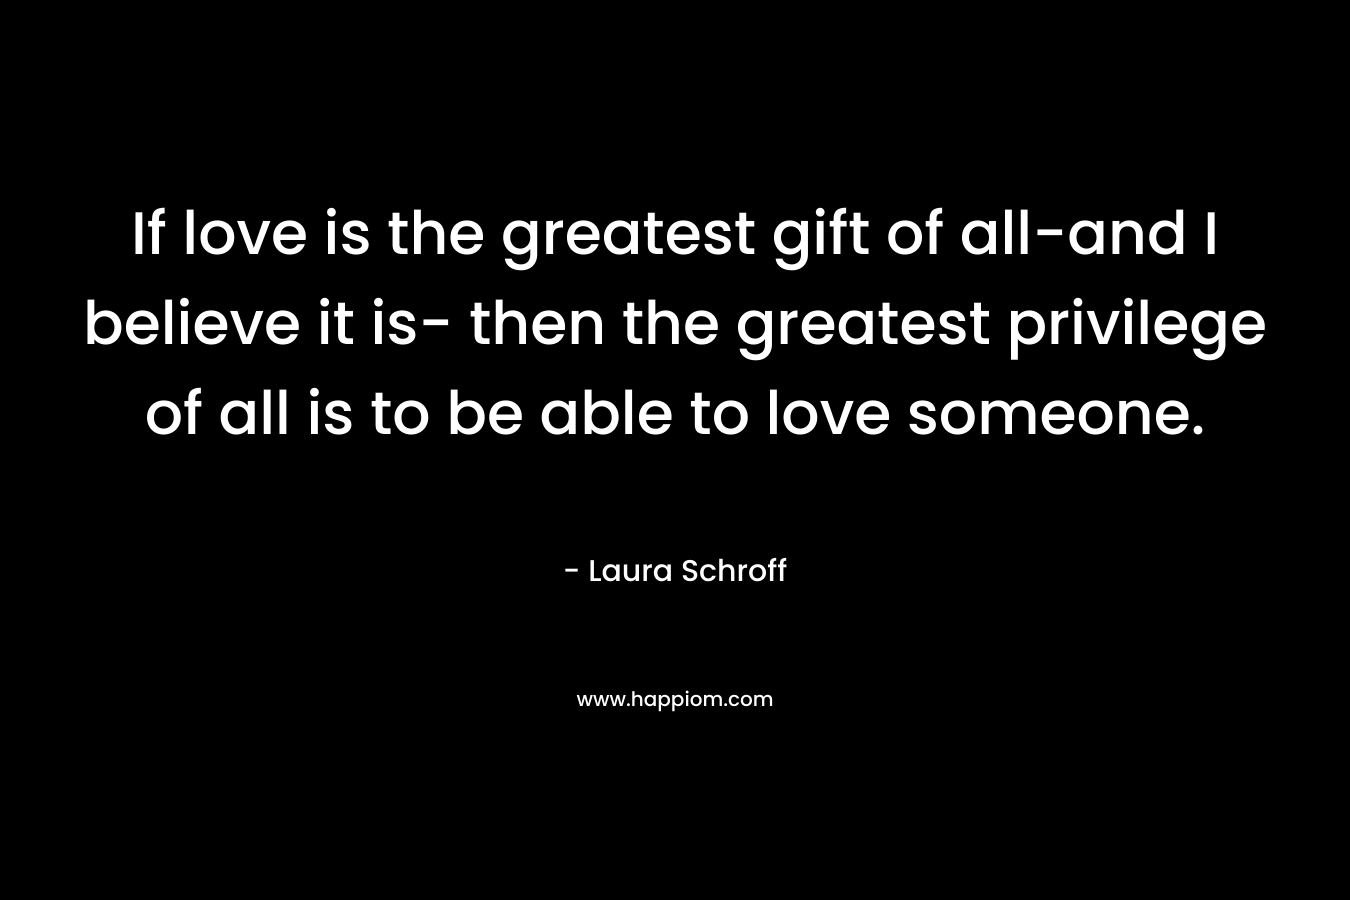 If love is the greatest gift of all-and I believe it is- then the greatest privilege of all is to be able to love someone.